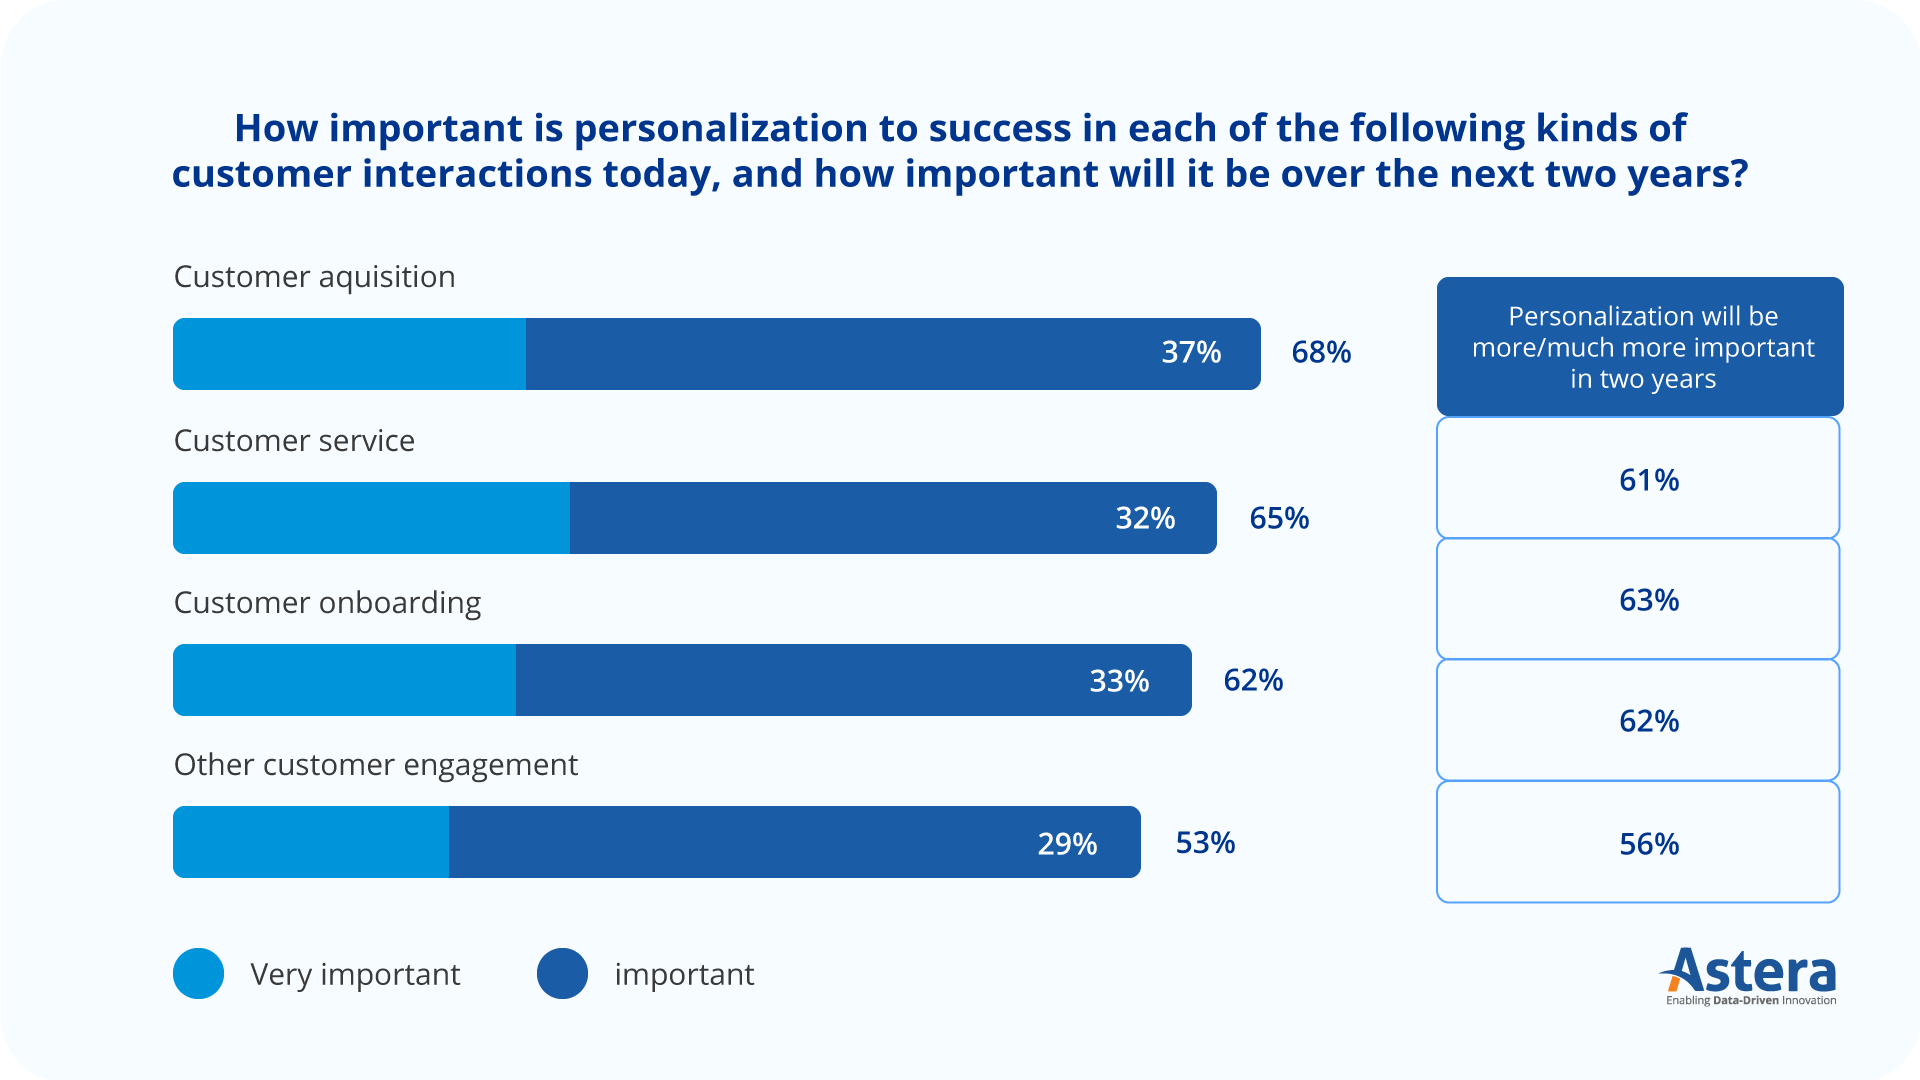 Importance of finance in personalization